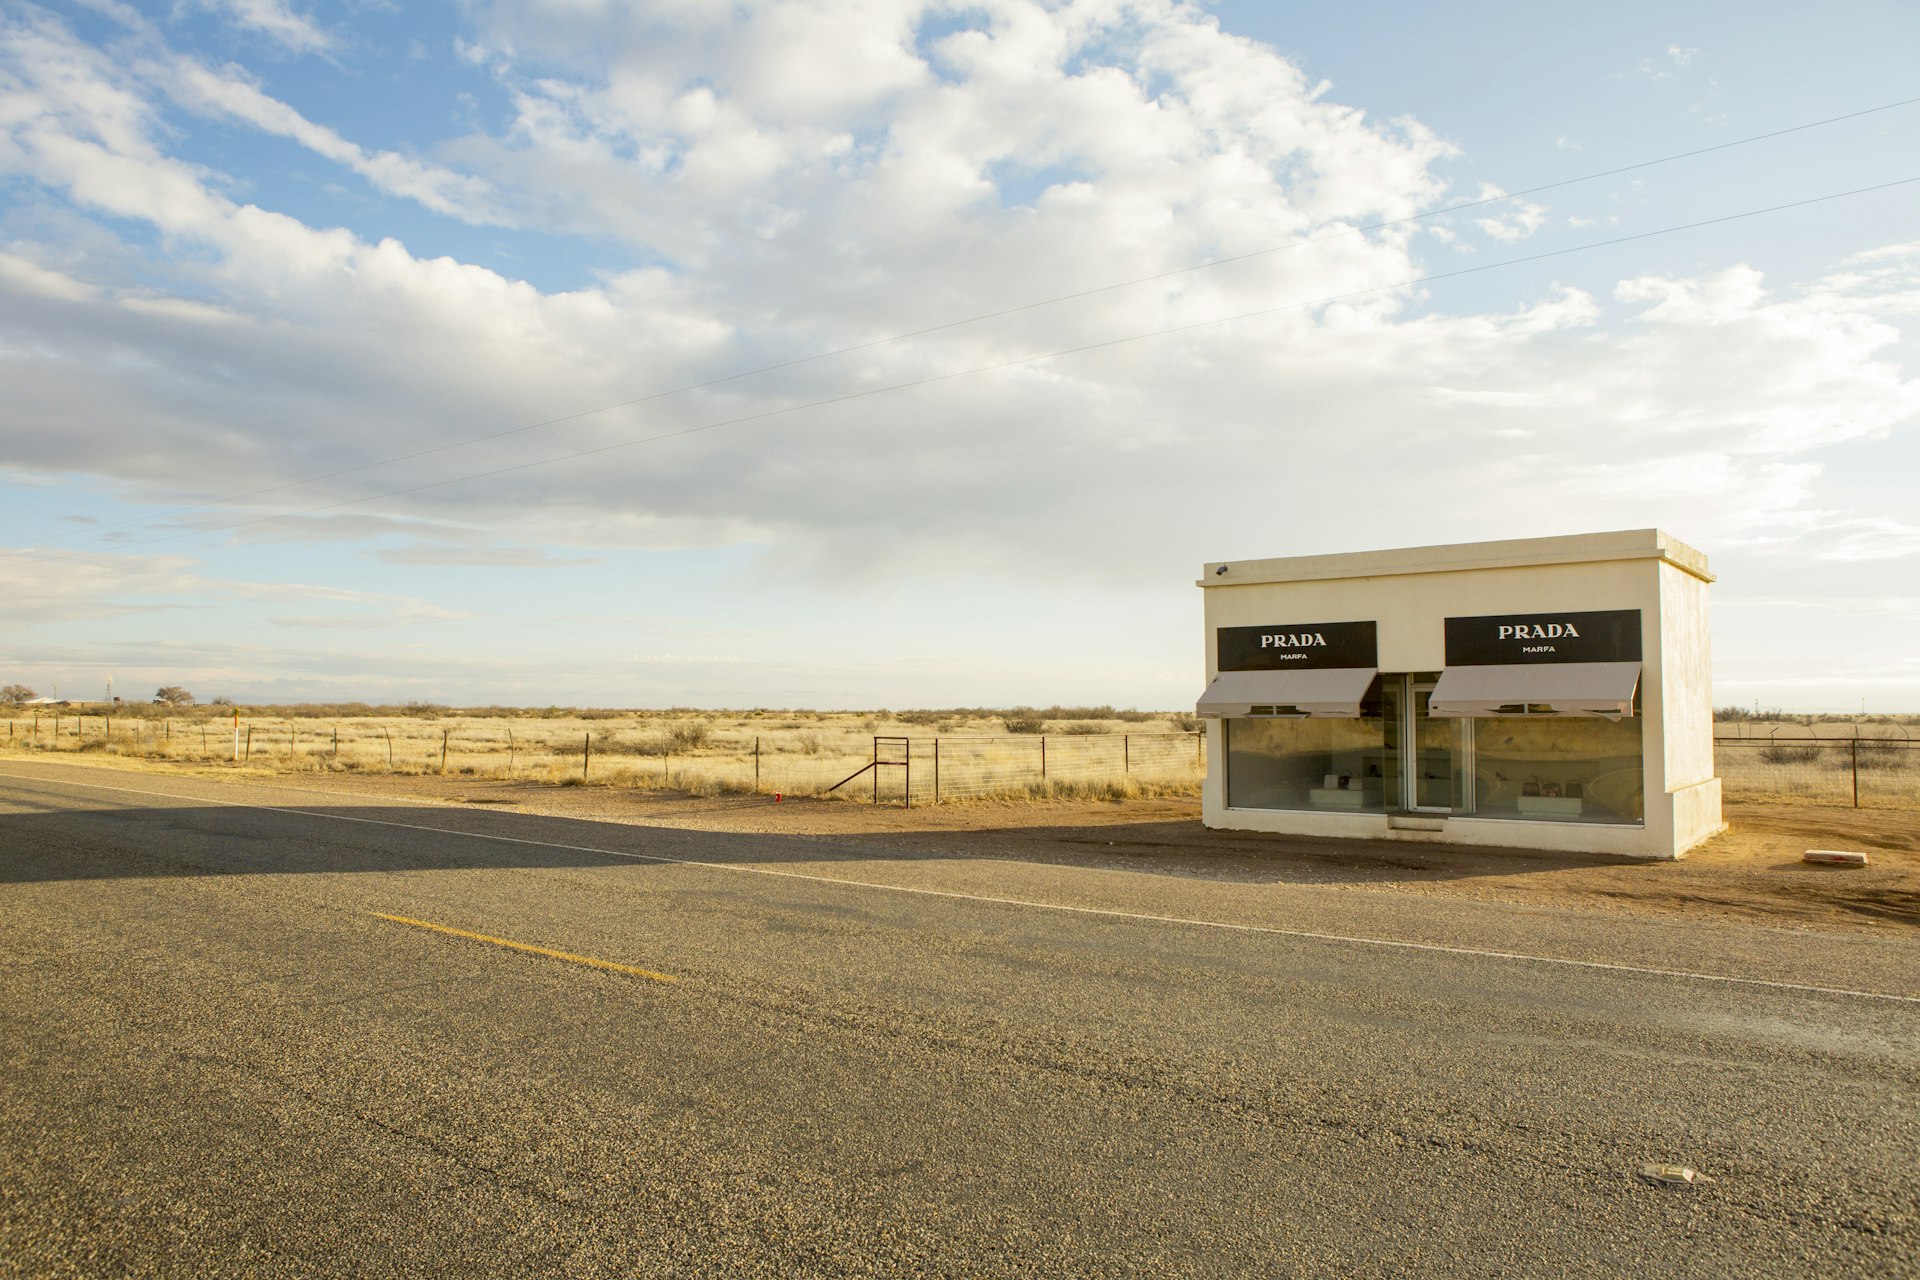 Prada Marfa, a permanently installed sculpture by artists Elmgreen and Dragset, situated 1.4 miles (2.3 km) northwest of Valentine, Texas, just off U.S. Highway 90 (US 90), and about 26 miles (42 km) northwest of the city of Marfa. 